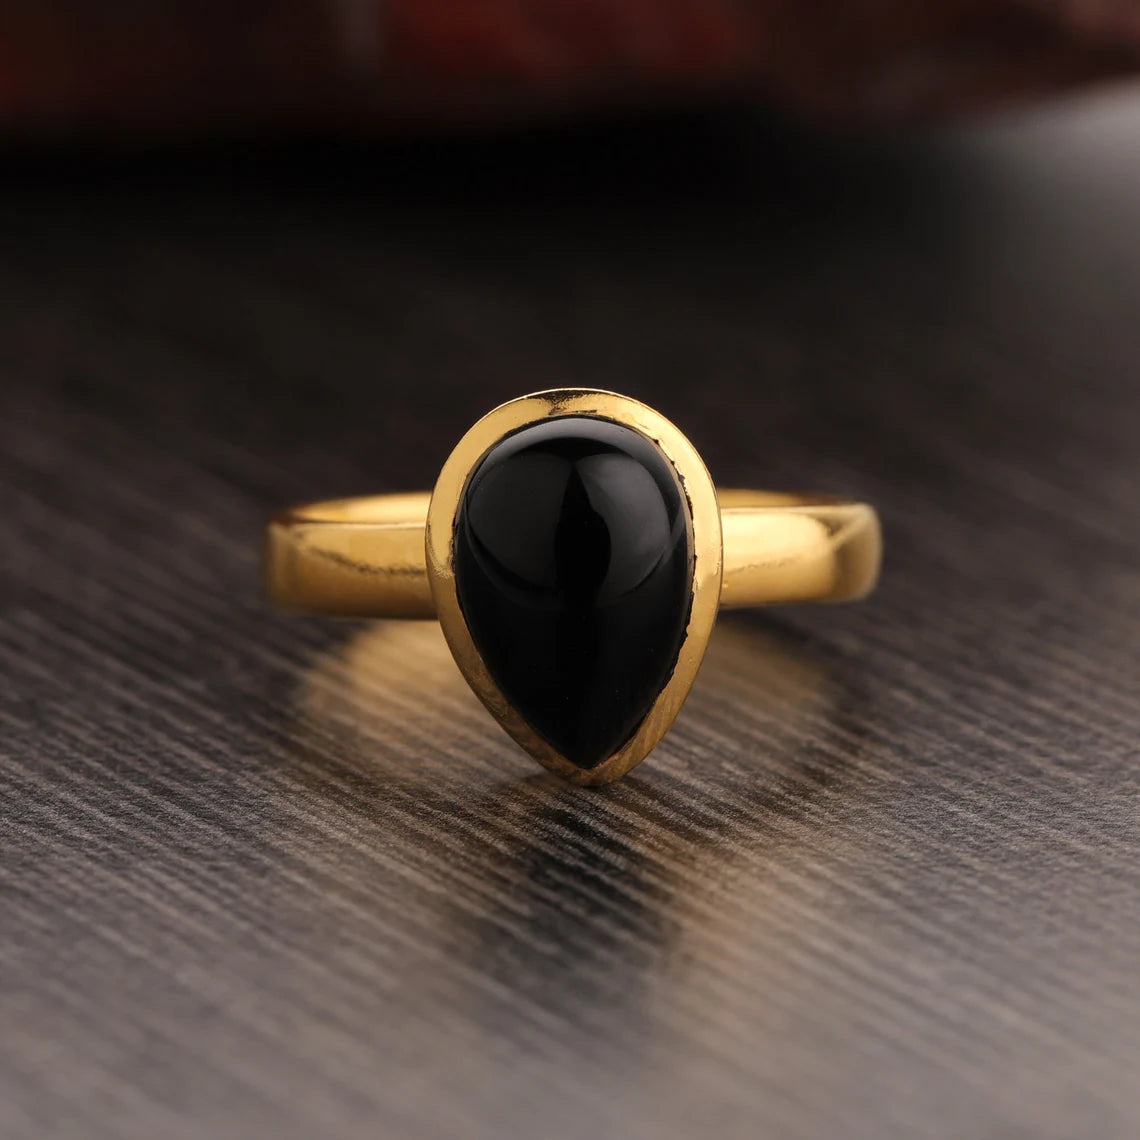 Black Onyx Pear Shape Gemstone Ring in Sterling Silver with Gold Plating